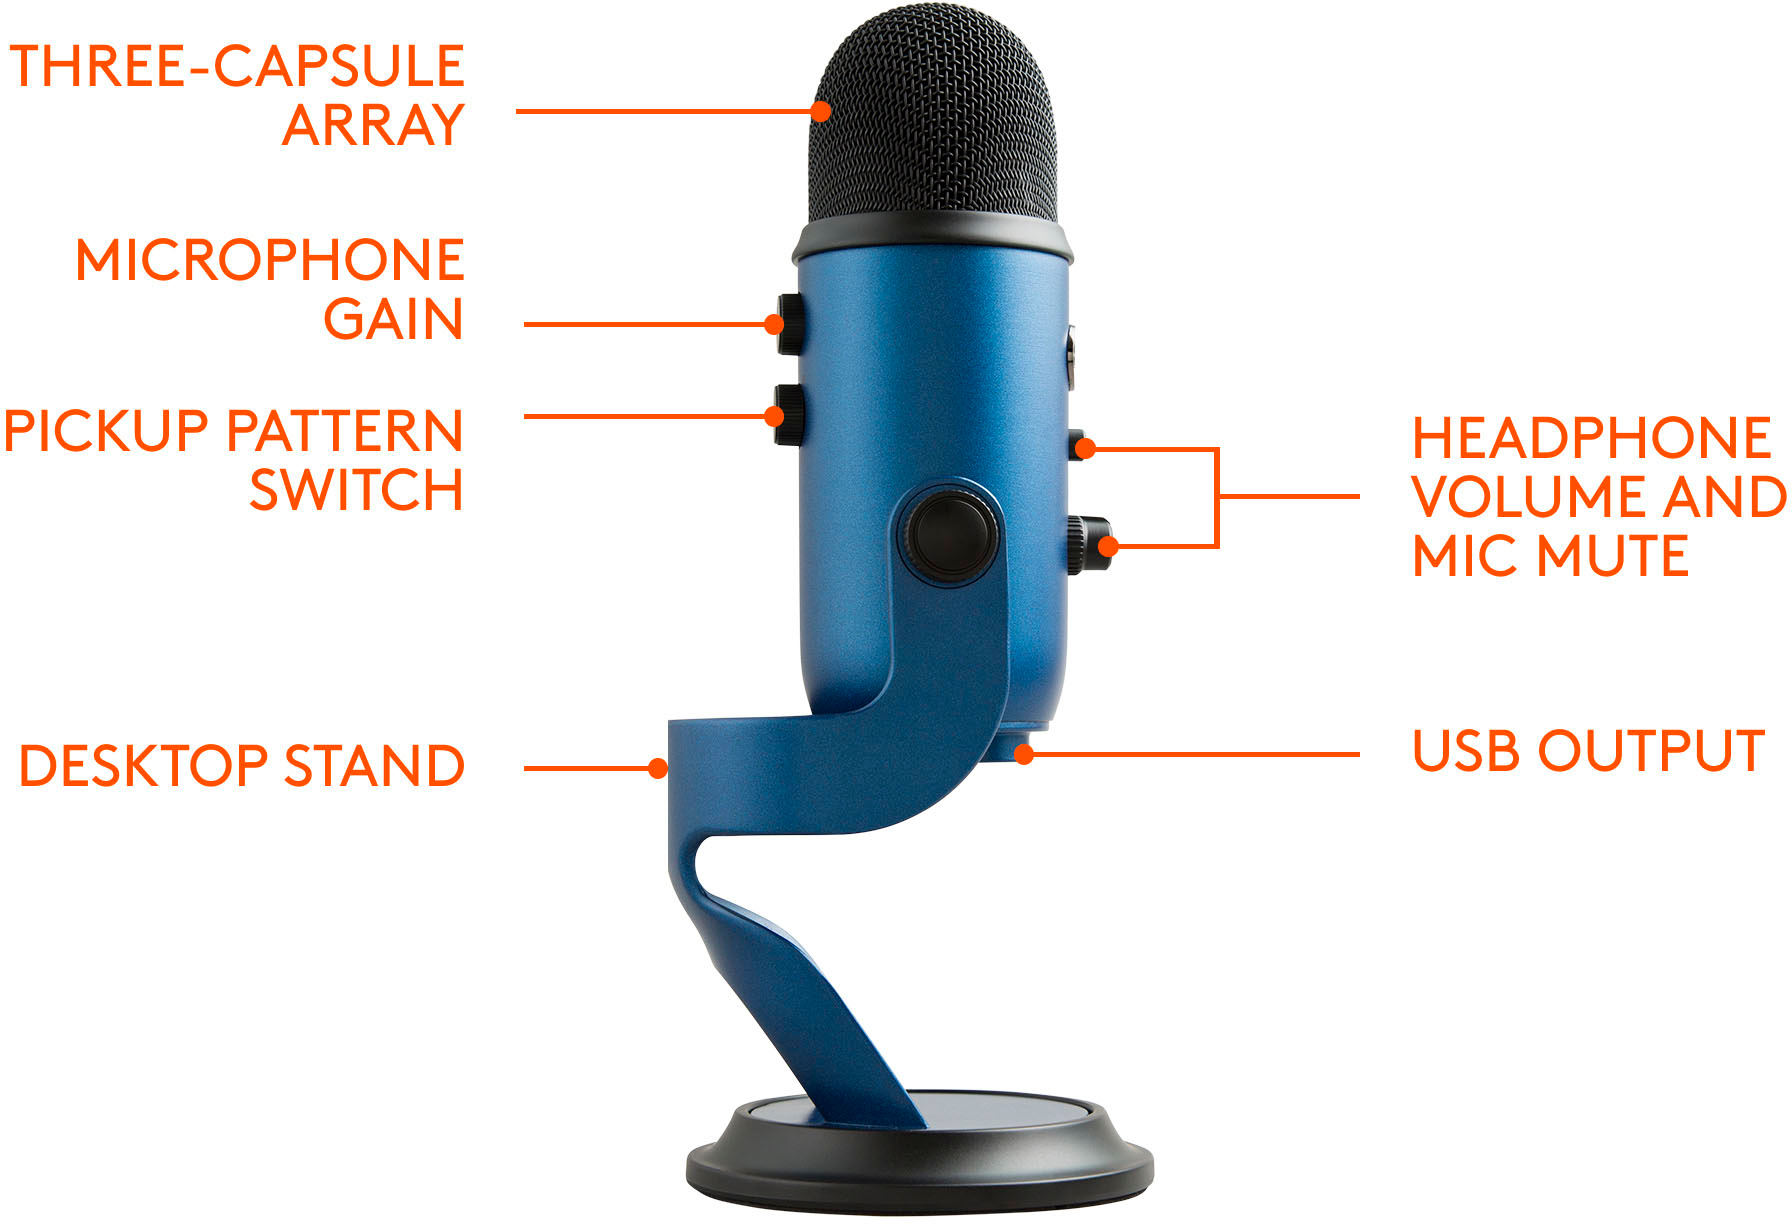 Original Blue yeti professional condenser microphone Karaoke recording live  broadcasting USB microphone with stand